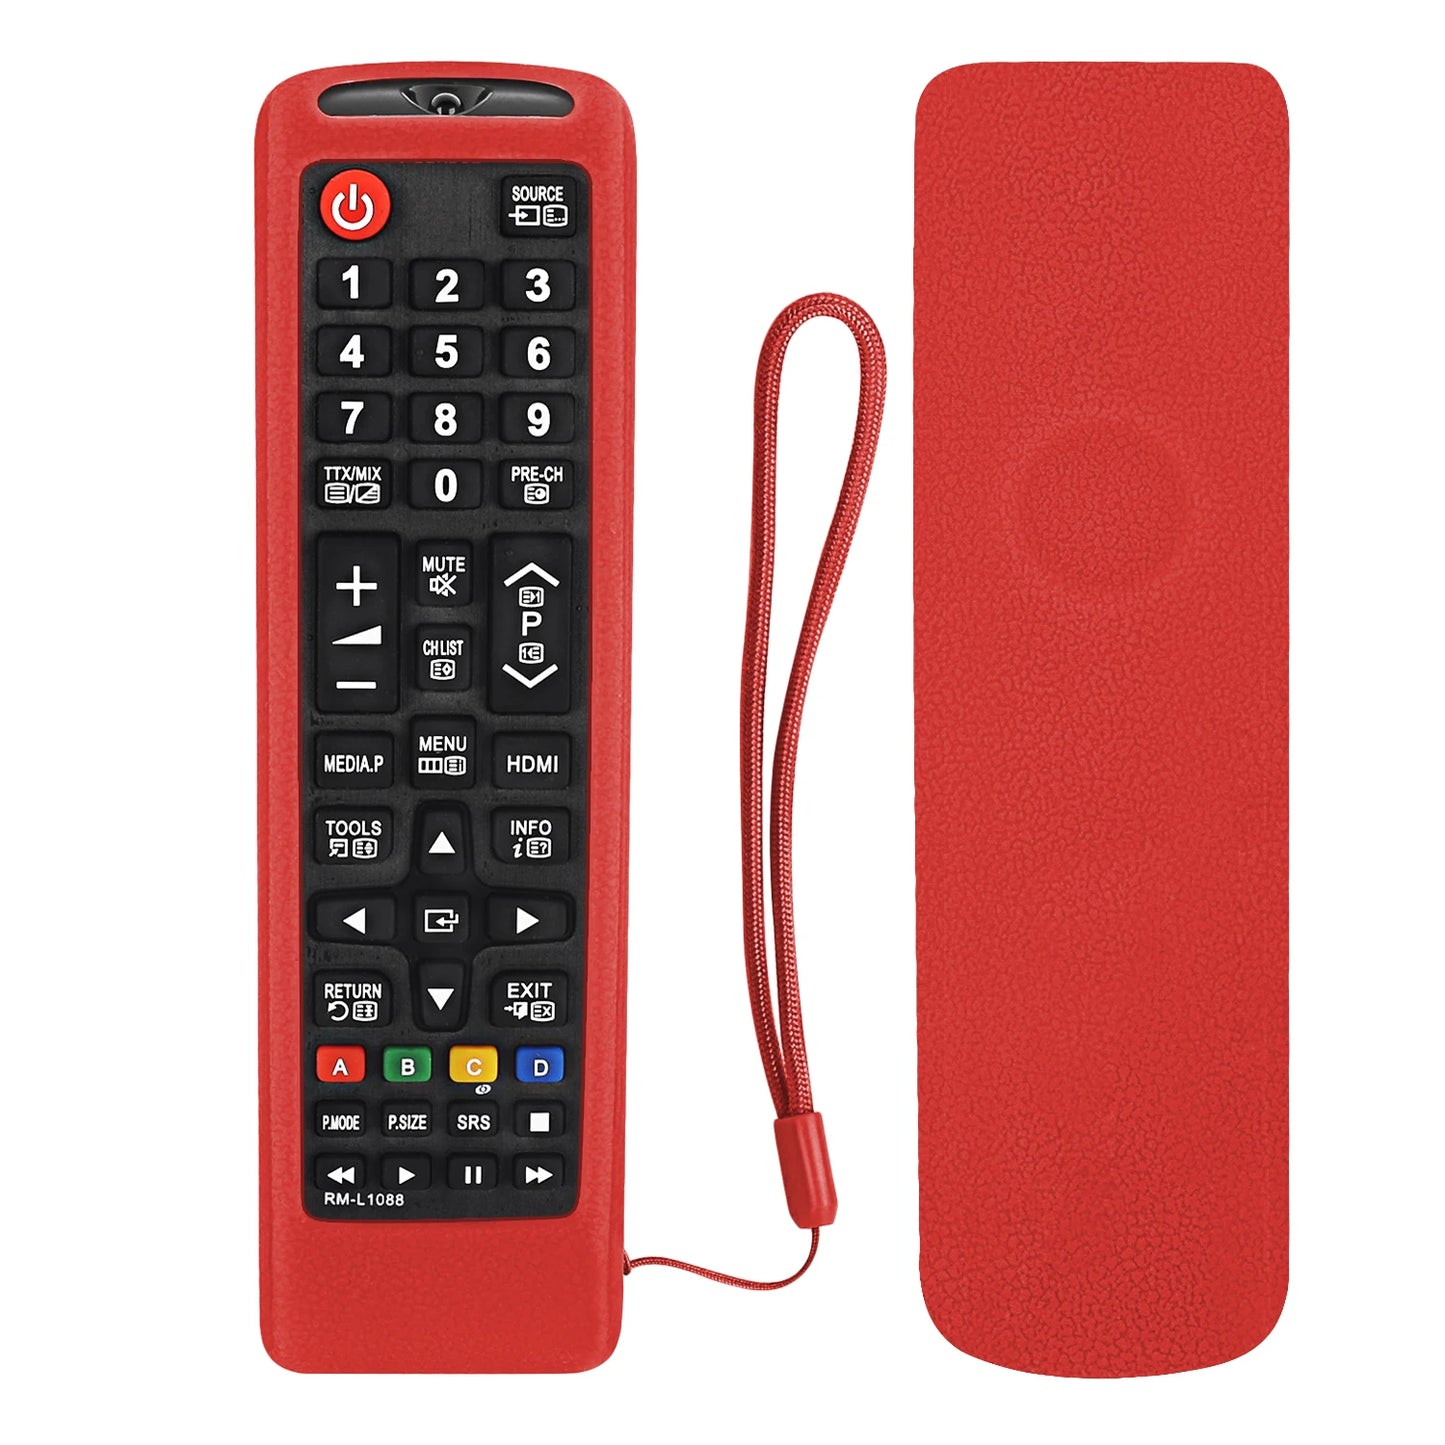 Protective Sheath Anti-Drop Case TV Remote Control Cover Dustproof Protector Durable Silicone Soft Solid Home Fit for Samsung